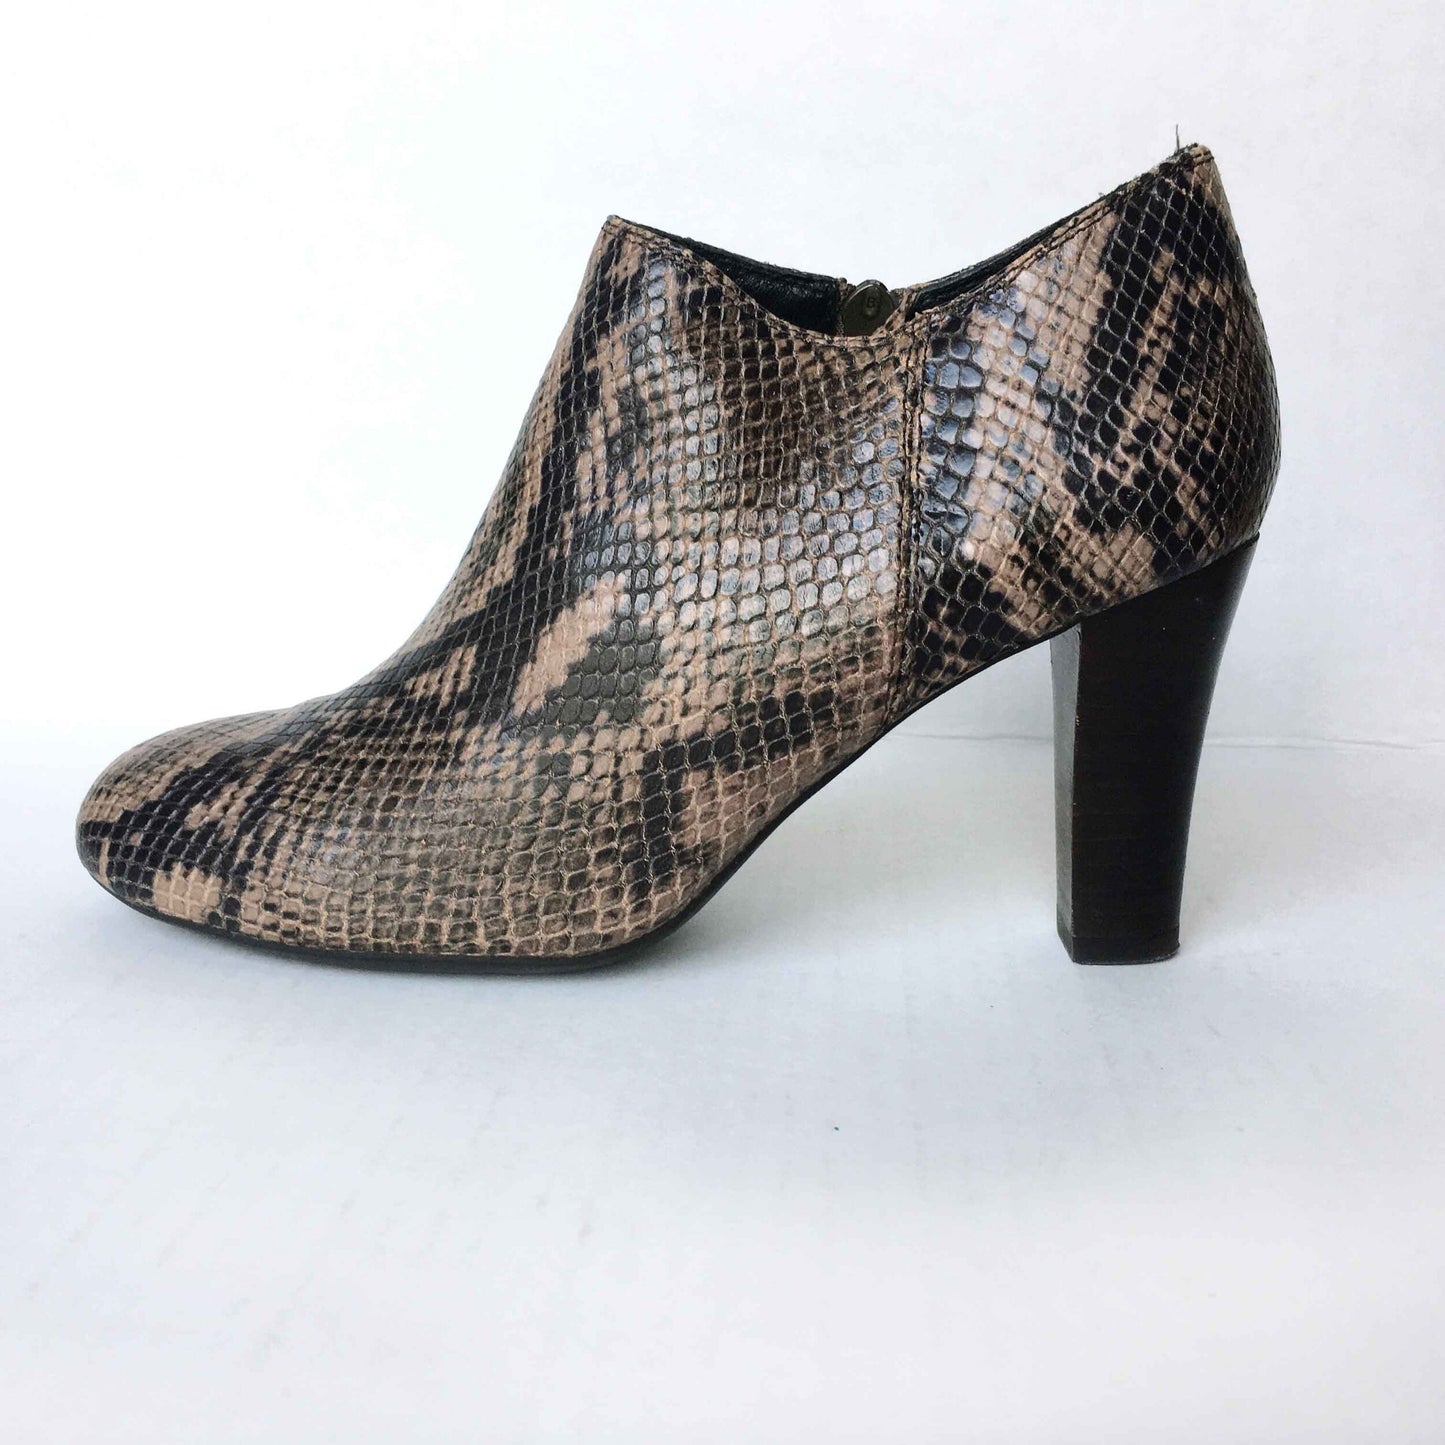 geox python printed leather ankle bootie - size 37.5